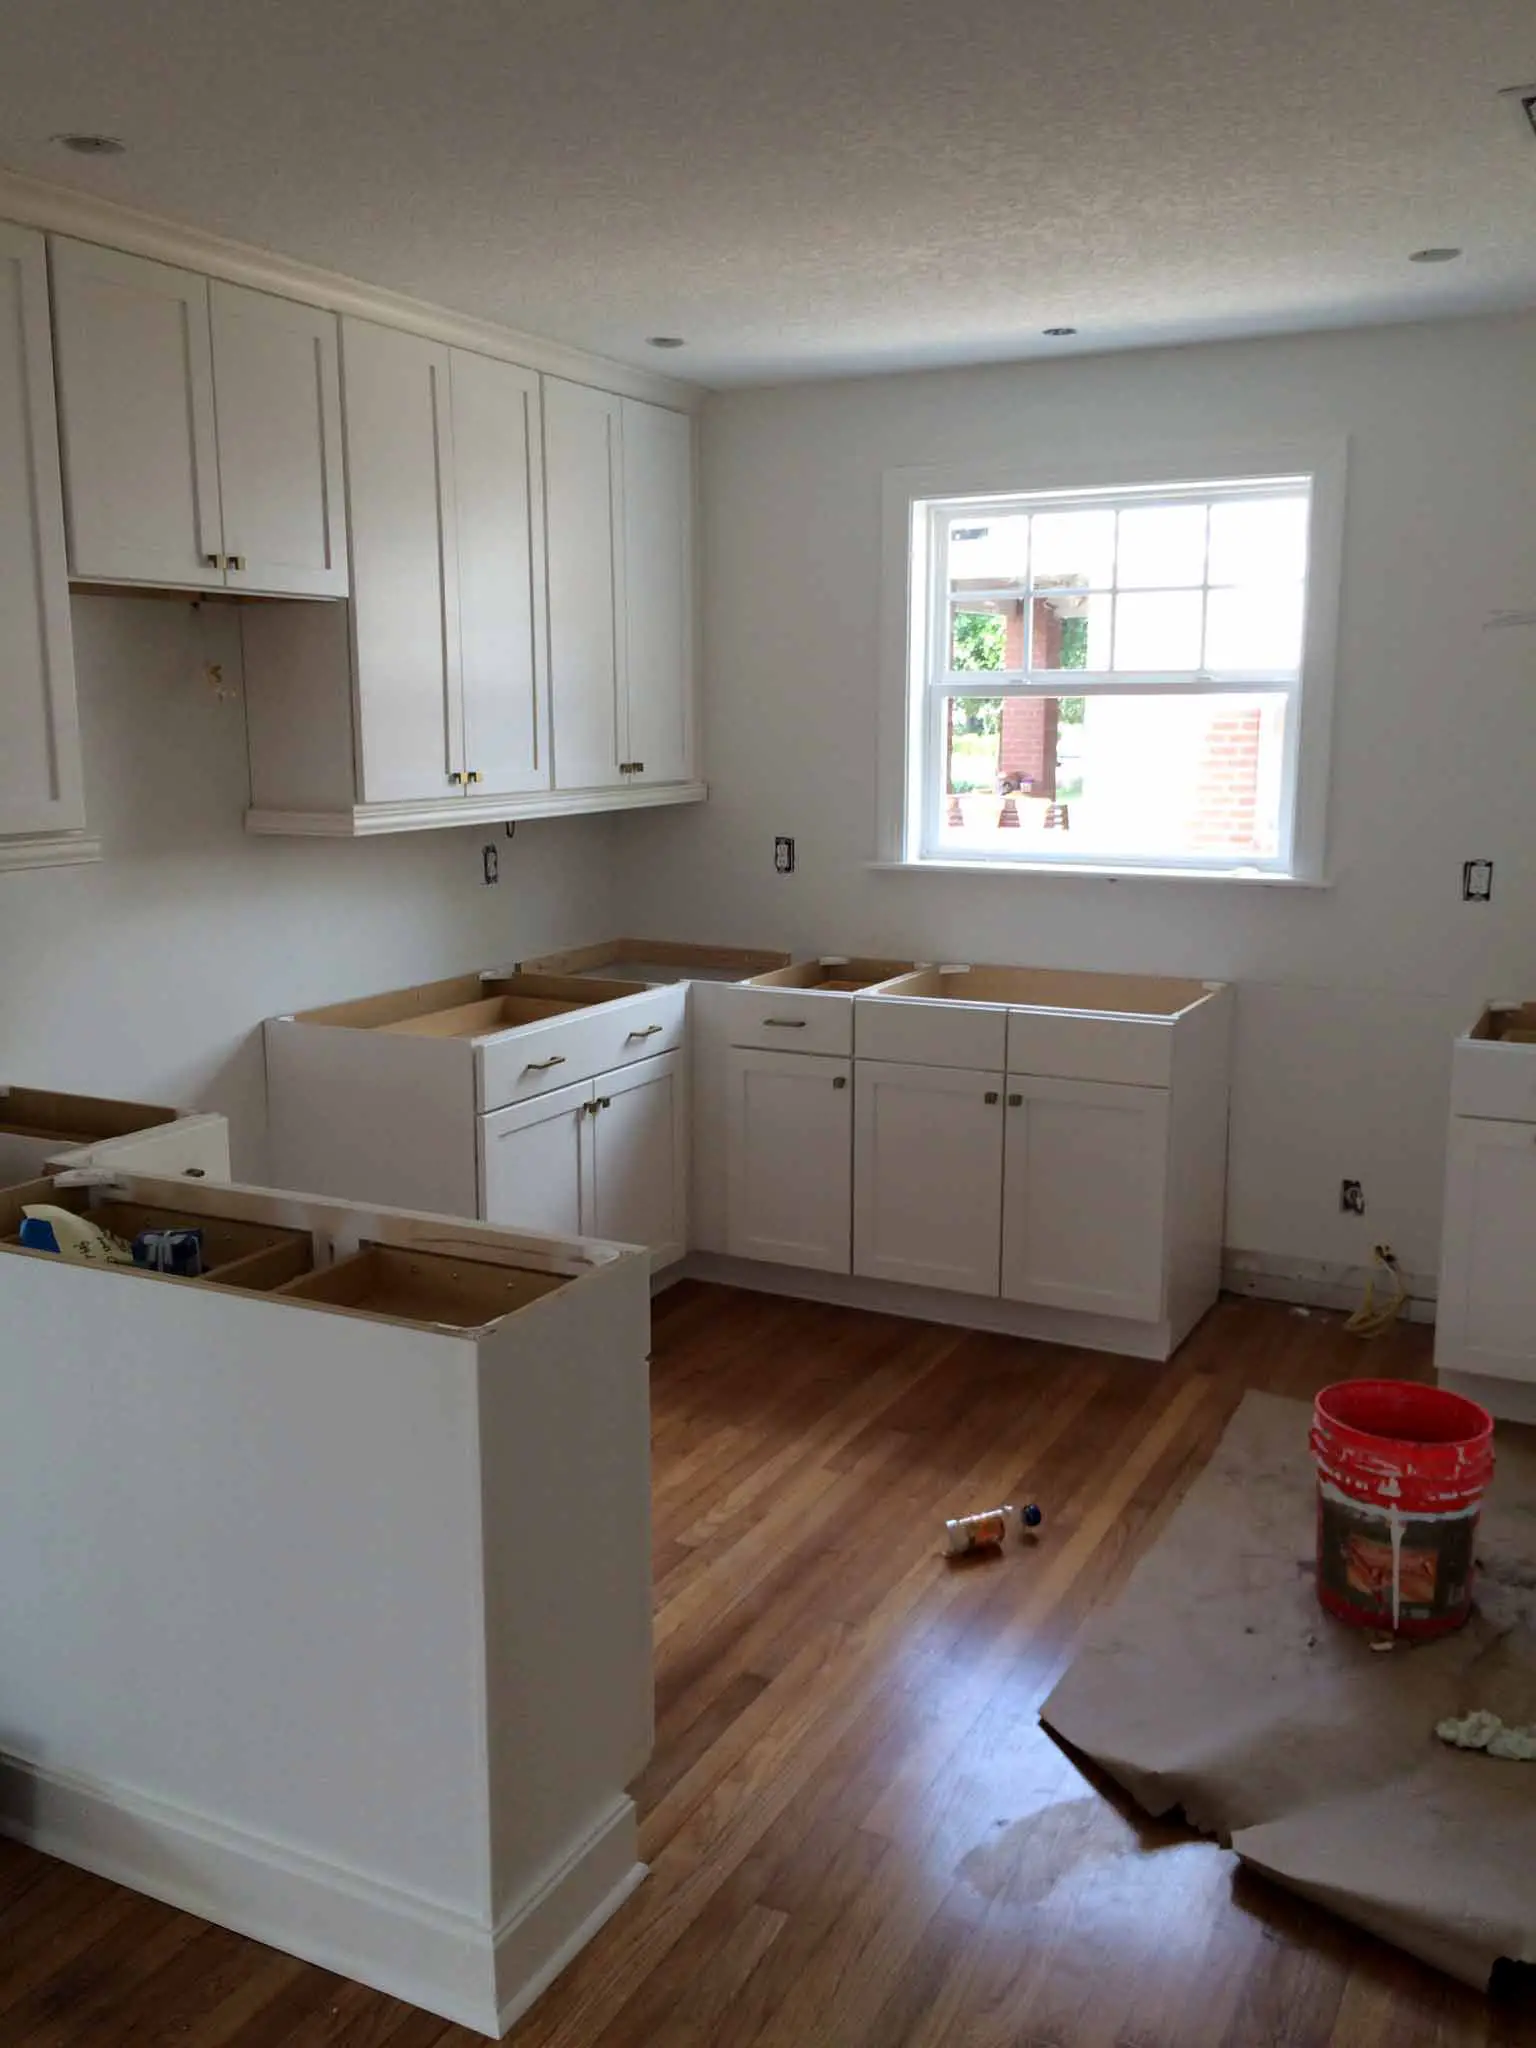 Kitchen Cabinetry Being Installed - That Homebird Life